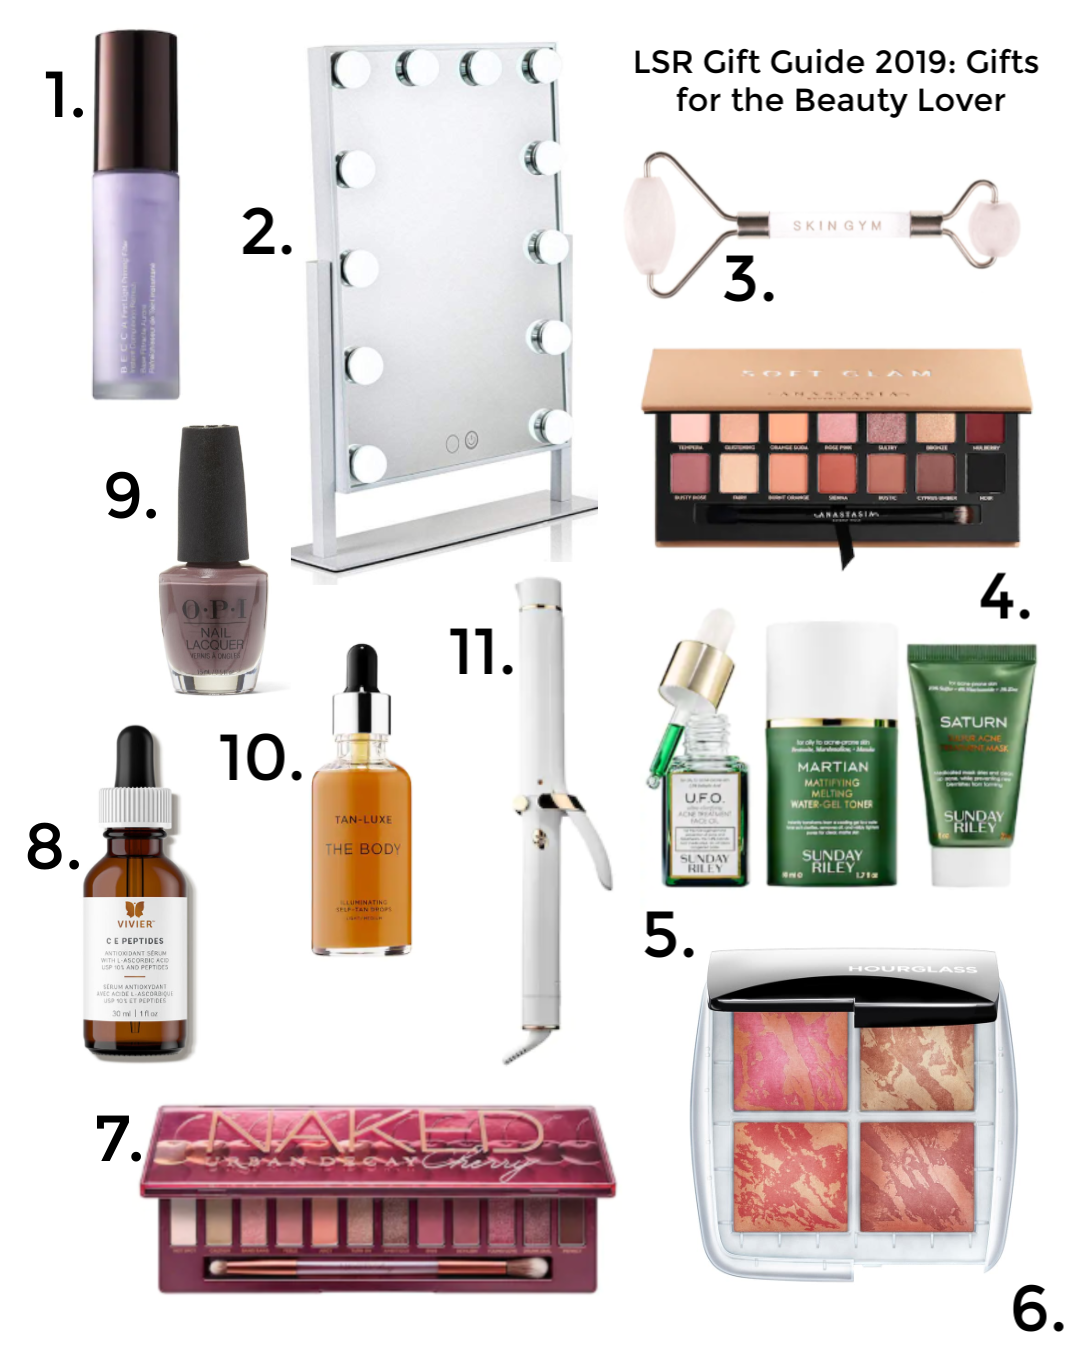 LSR Gift Guide 2019: Gifts for the Beauty Lover